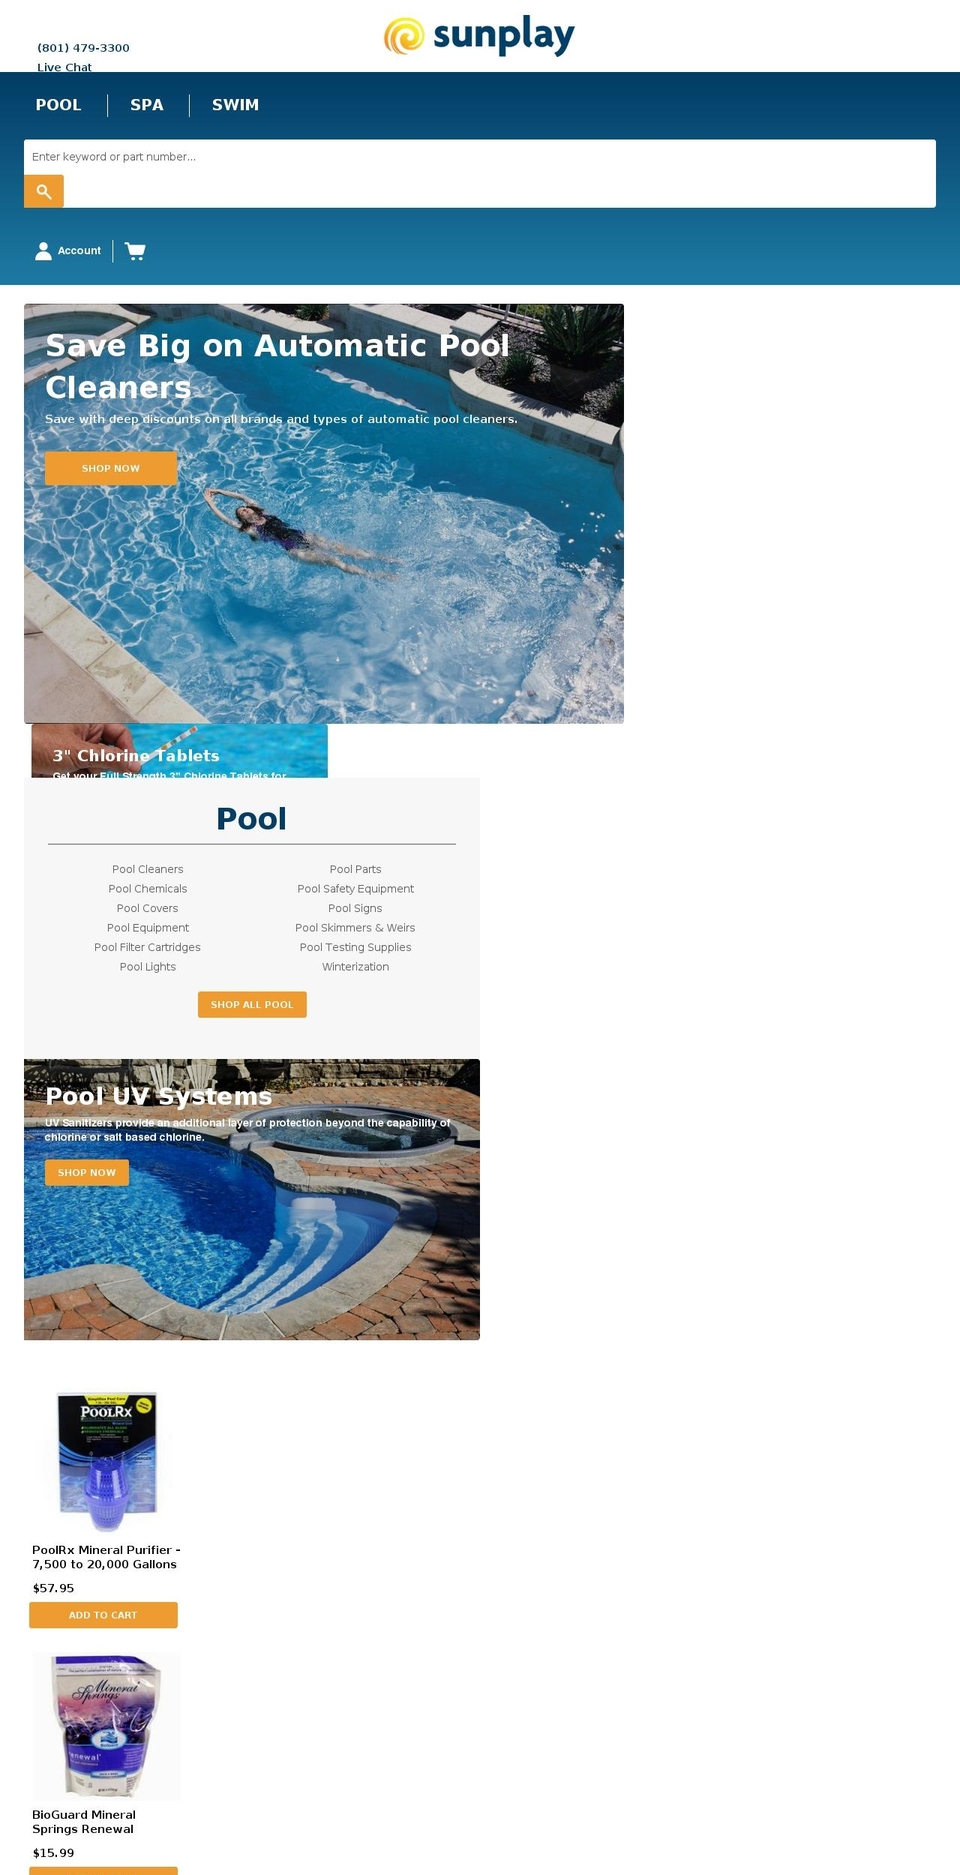 Sunplay v1.0 [Speck - Collection] Shopify theme site example sunplayhottubs.com